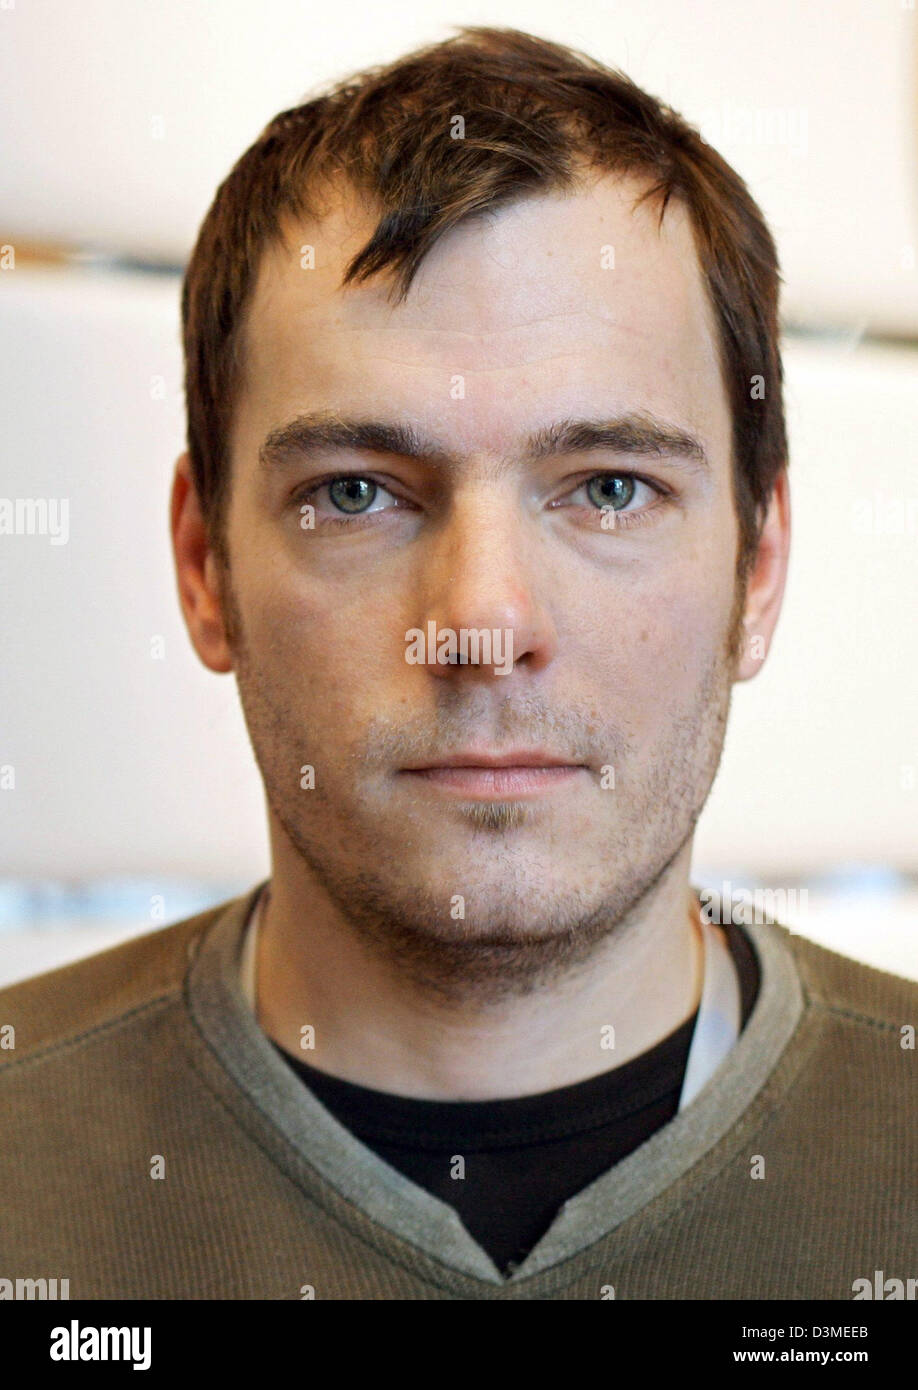 German director and screen-writer Mirkoo Borscht pictured during the presentation of his new film 'Kombat Sechzehn' at the 56th International Film Festival Berlinale in Berlin, Germany, Friday 17 February 2006. Photo: Soeren Stache Stock Photo